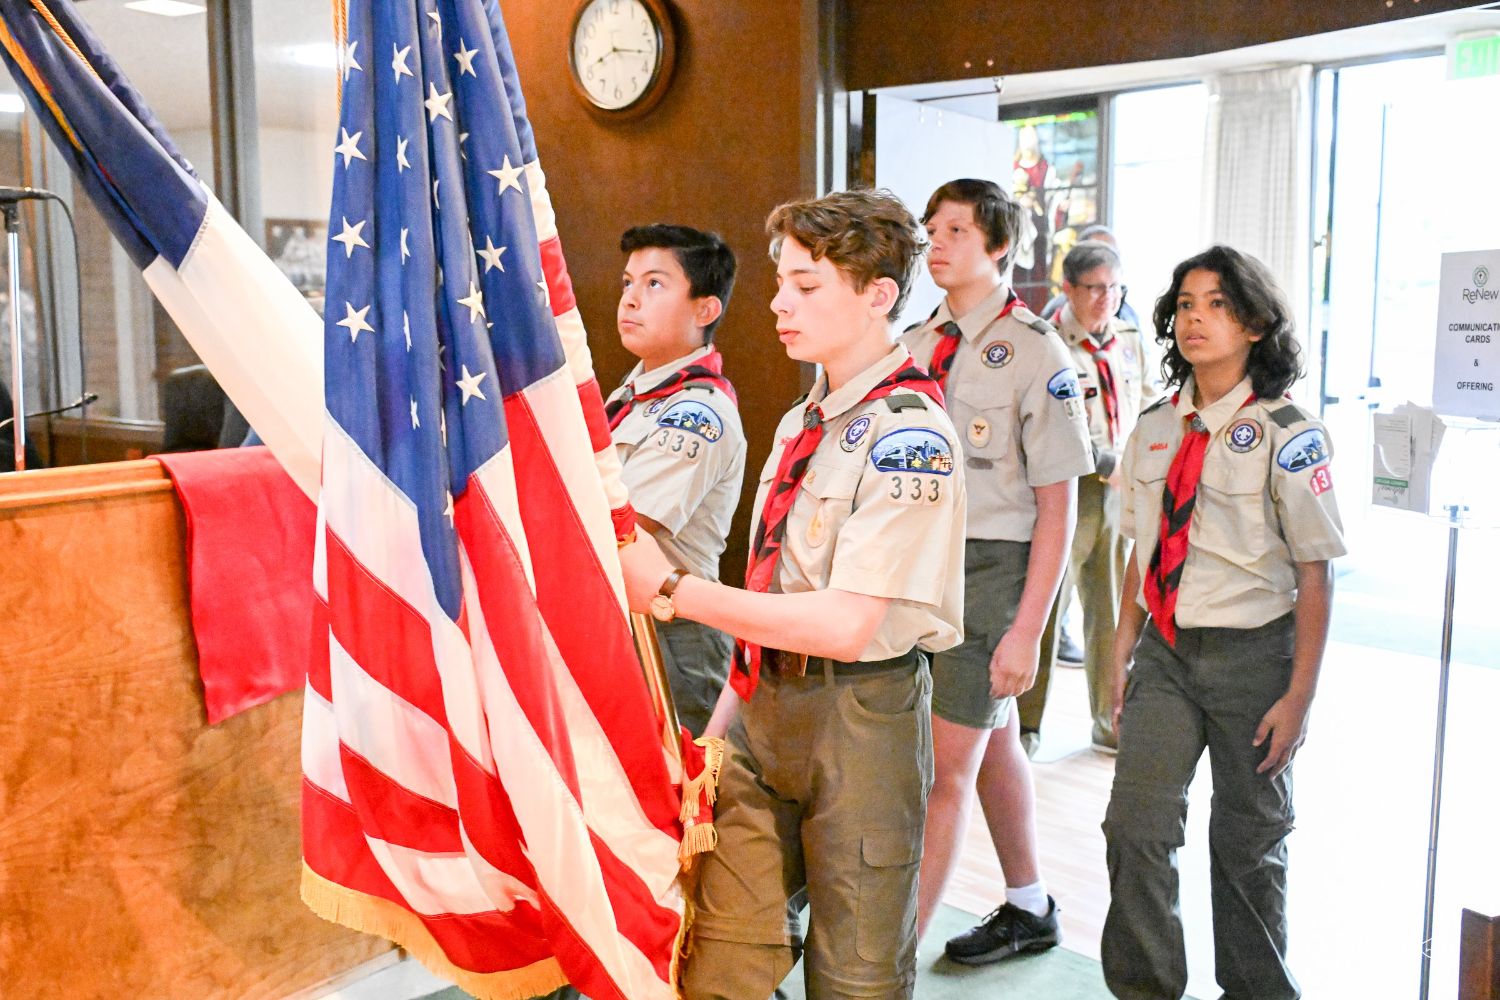 PHOTO: J. Mike Kwok | The South Pasadenan | Boy Scout Troop 333 at the Prayer Breakfast performing the Color Guard Ceremony.